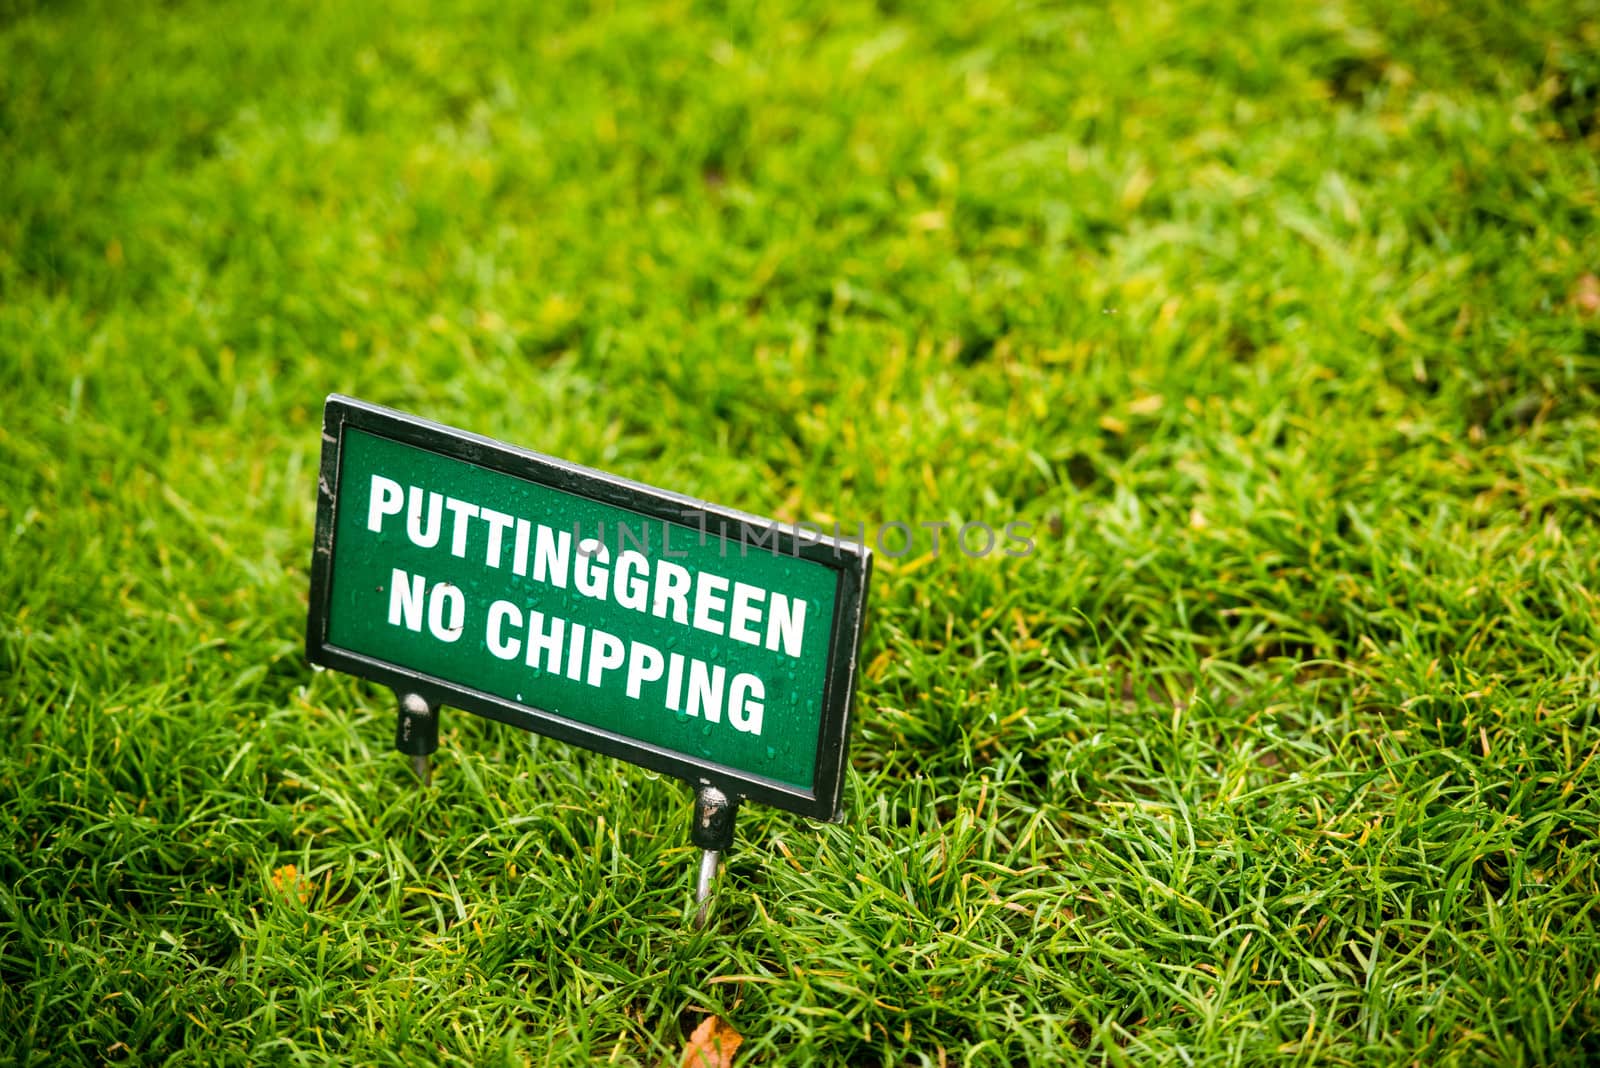 Putting green at the golf course with sign "putting green - no chipping"